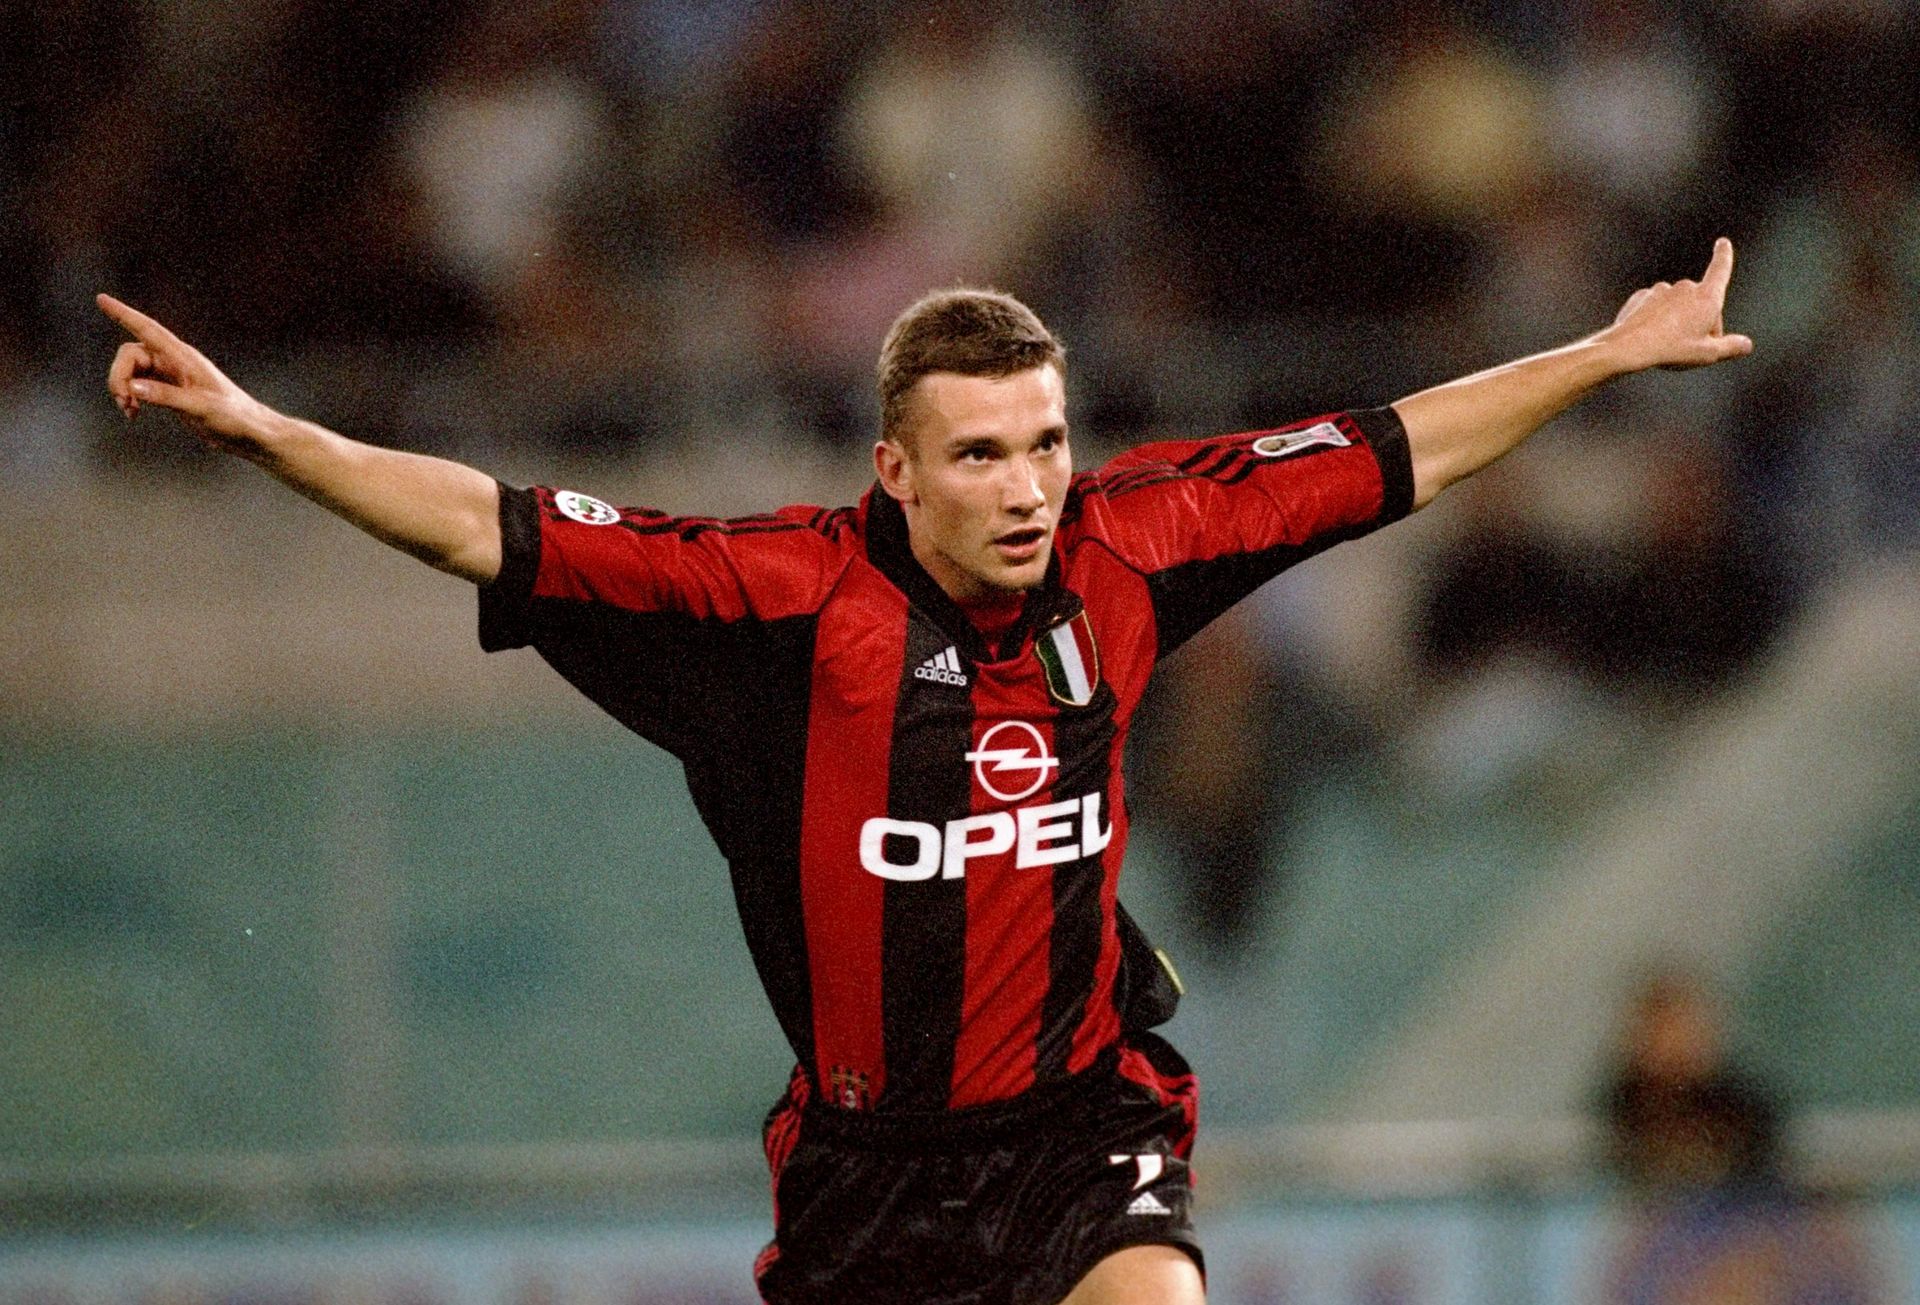 <p>                     Andriy Shevchenko was one of the most coveted strikers in Europe in the 1990s and the Ukrainian eventually left Dynamo Kyiv for AC Milan in 1999 for a fee of €23.91 million.                   </p>                                      <p>                     Shevchenko quickly became a fan favourite at San Siro and went on to score 173 goals in 296 appearances for the Rossoneri before moving to Chelsea in 2006.                   </p>